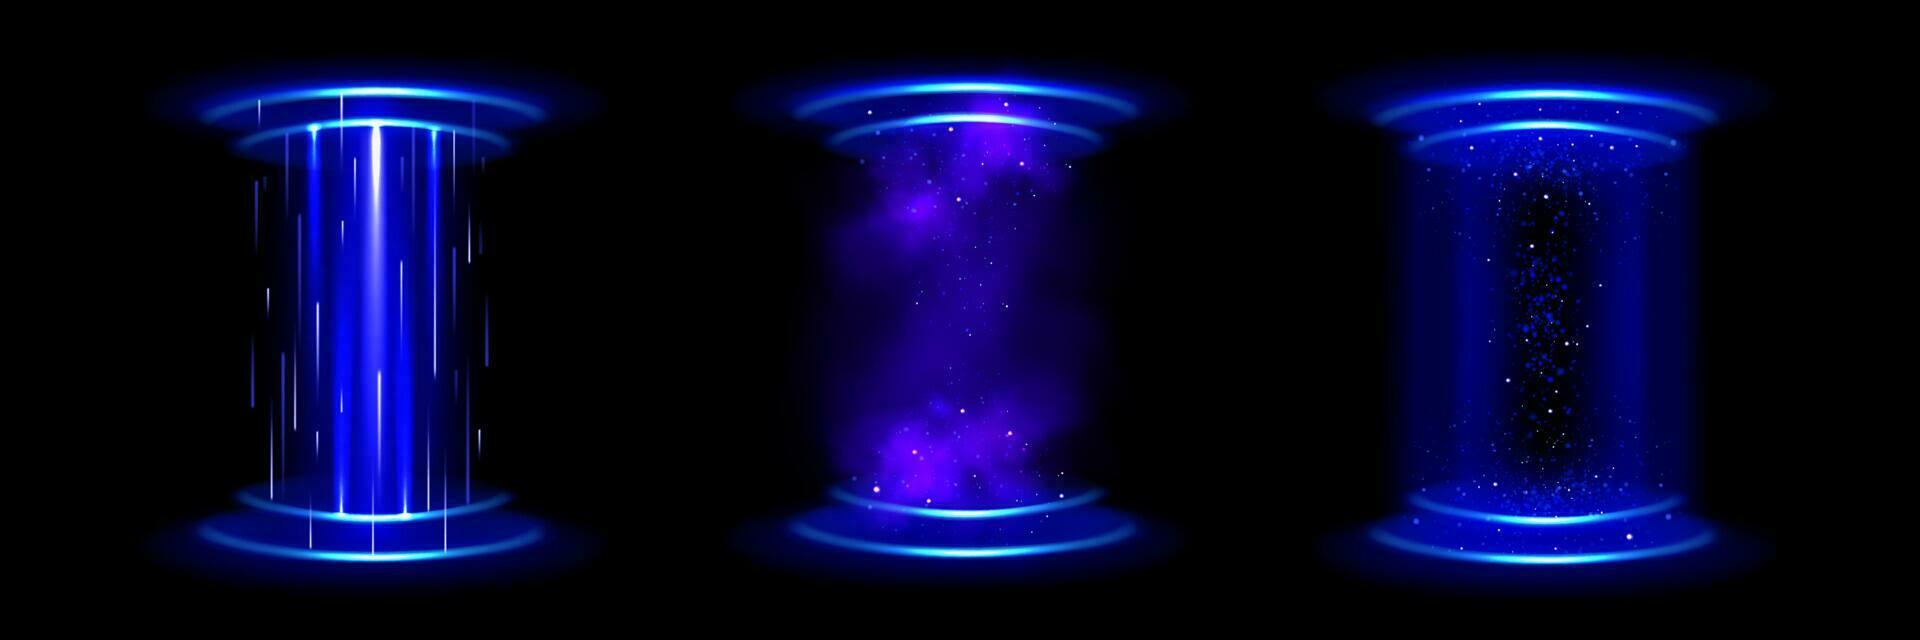 Magic portal, teleport with hologram effect vector